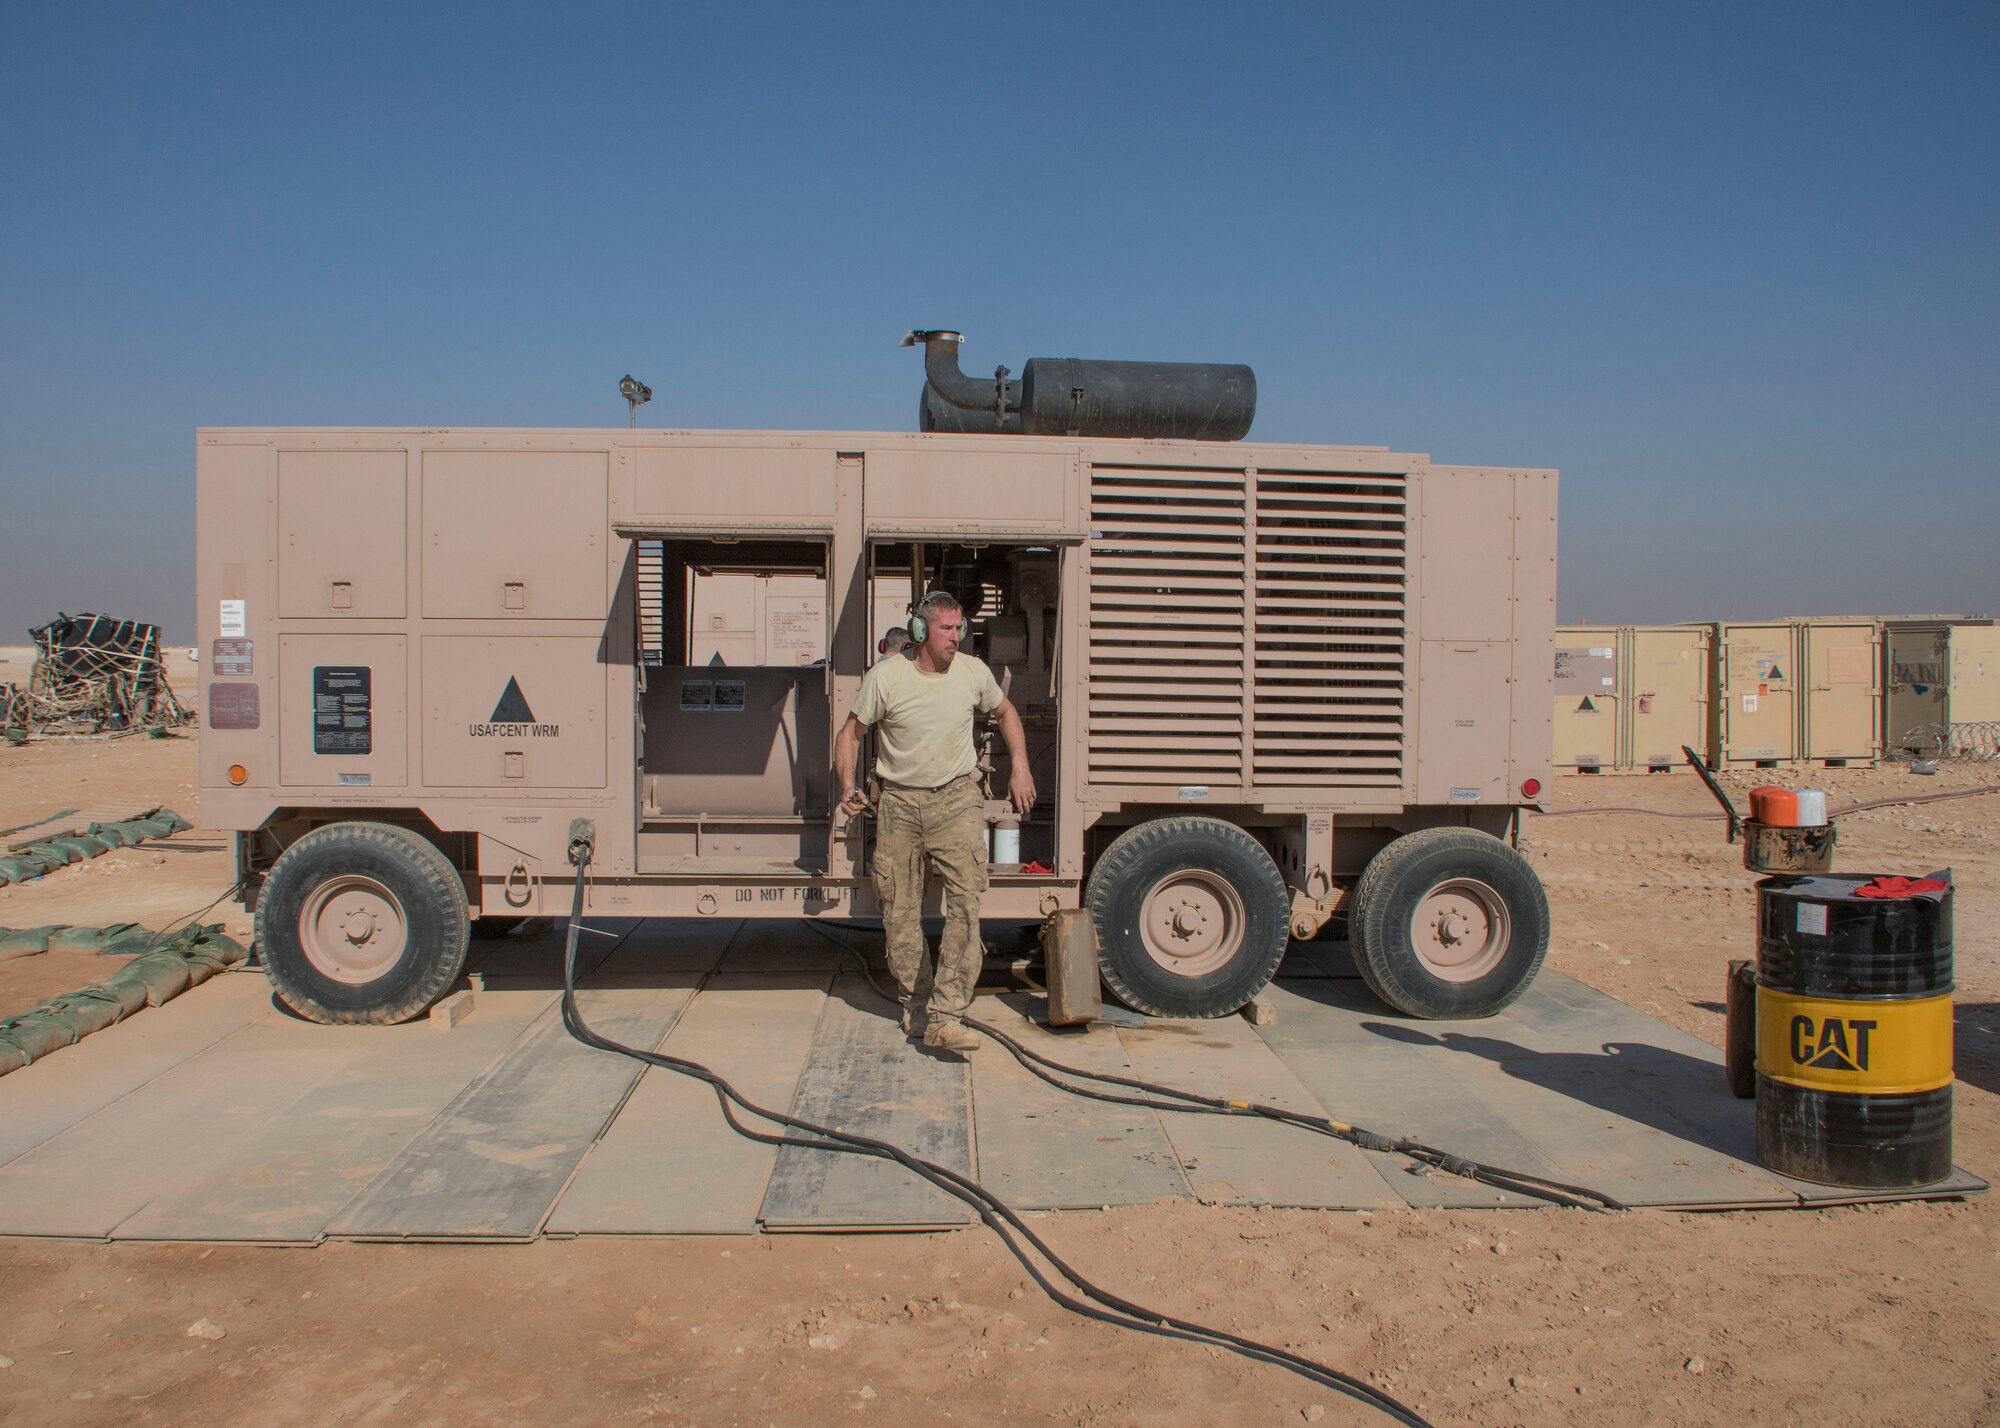 Staff Sgt. Gregory Speed, a 370th Air Expeditionary Advisory Group Detachment 1 electrician craftsman, exits a generator at Al Asad Air Base, Iraq Jan. 8, 2017. Preventive maintenance on these generators can take anywhere from an hour and a half to two hours to finish. (U.S. Air Force photo/Senior Airman Andrew Park)